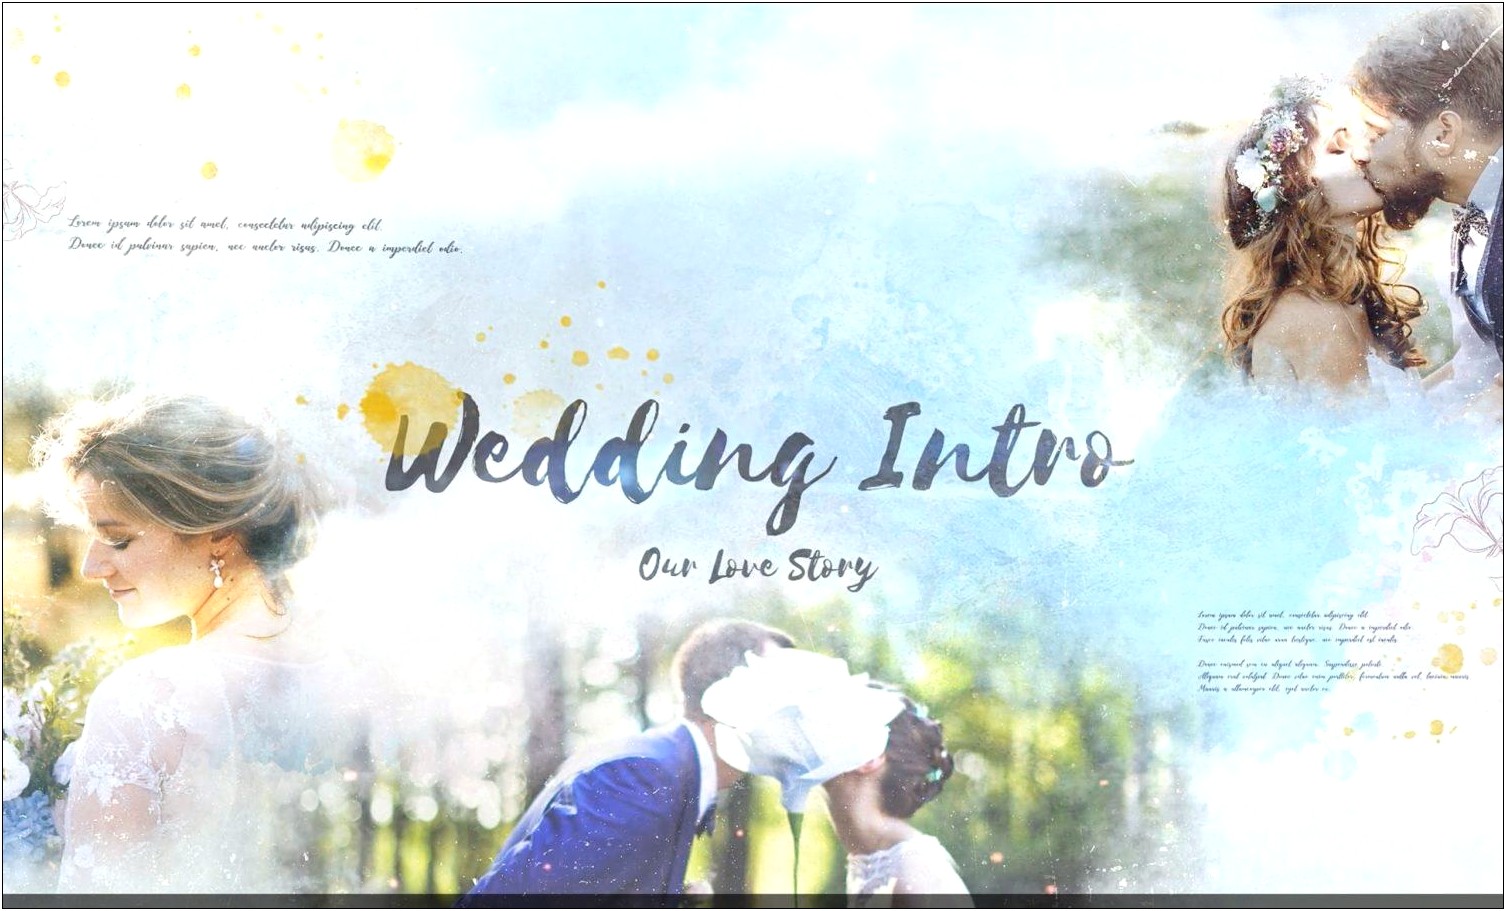 Wedding Invitation After Effects Project Files Free Download